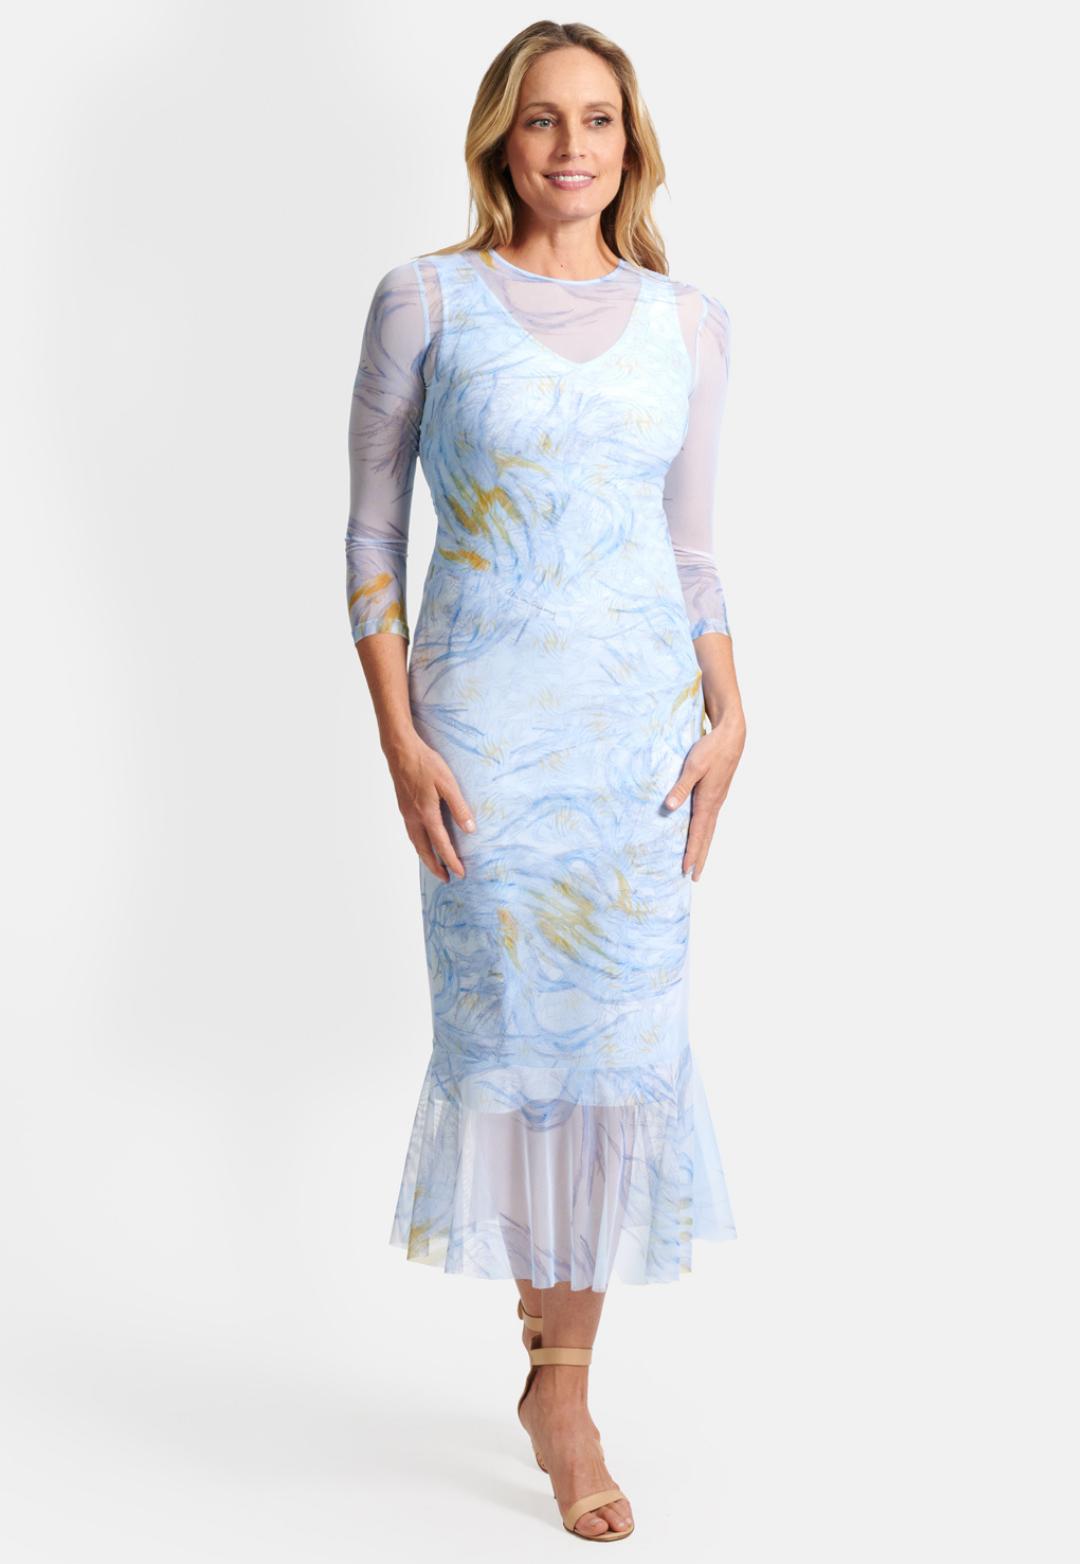 Woman wearing short stretch knit v neck blue and yellow feather printed dress with mesh feather printed dress over it by Ala von Auersperg